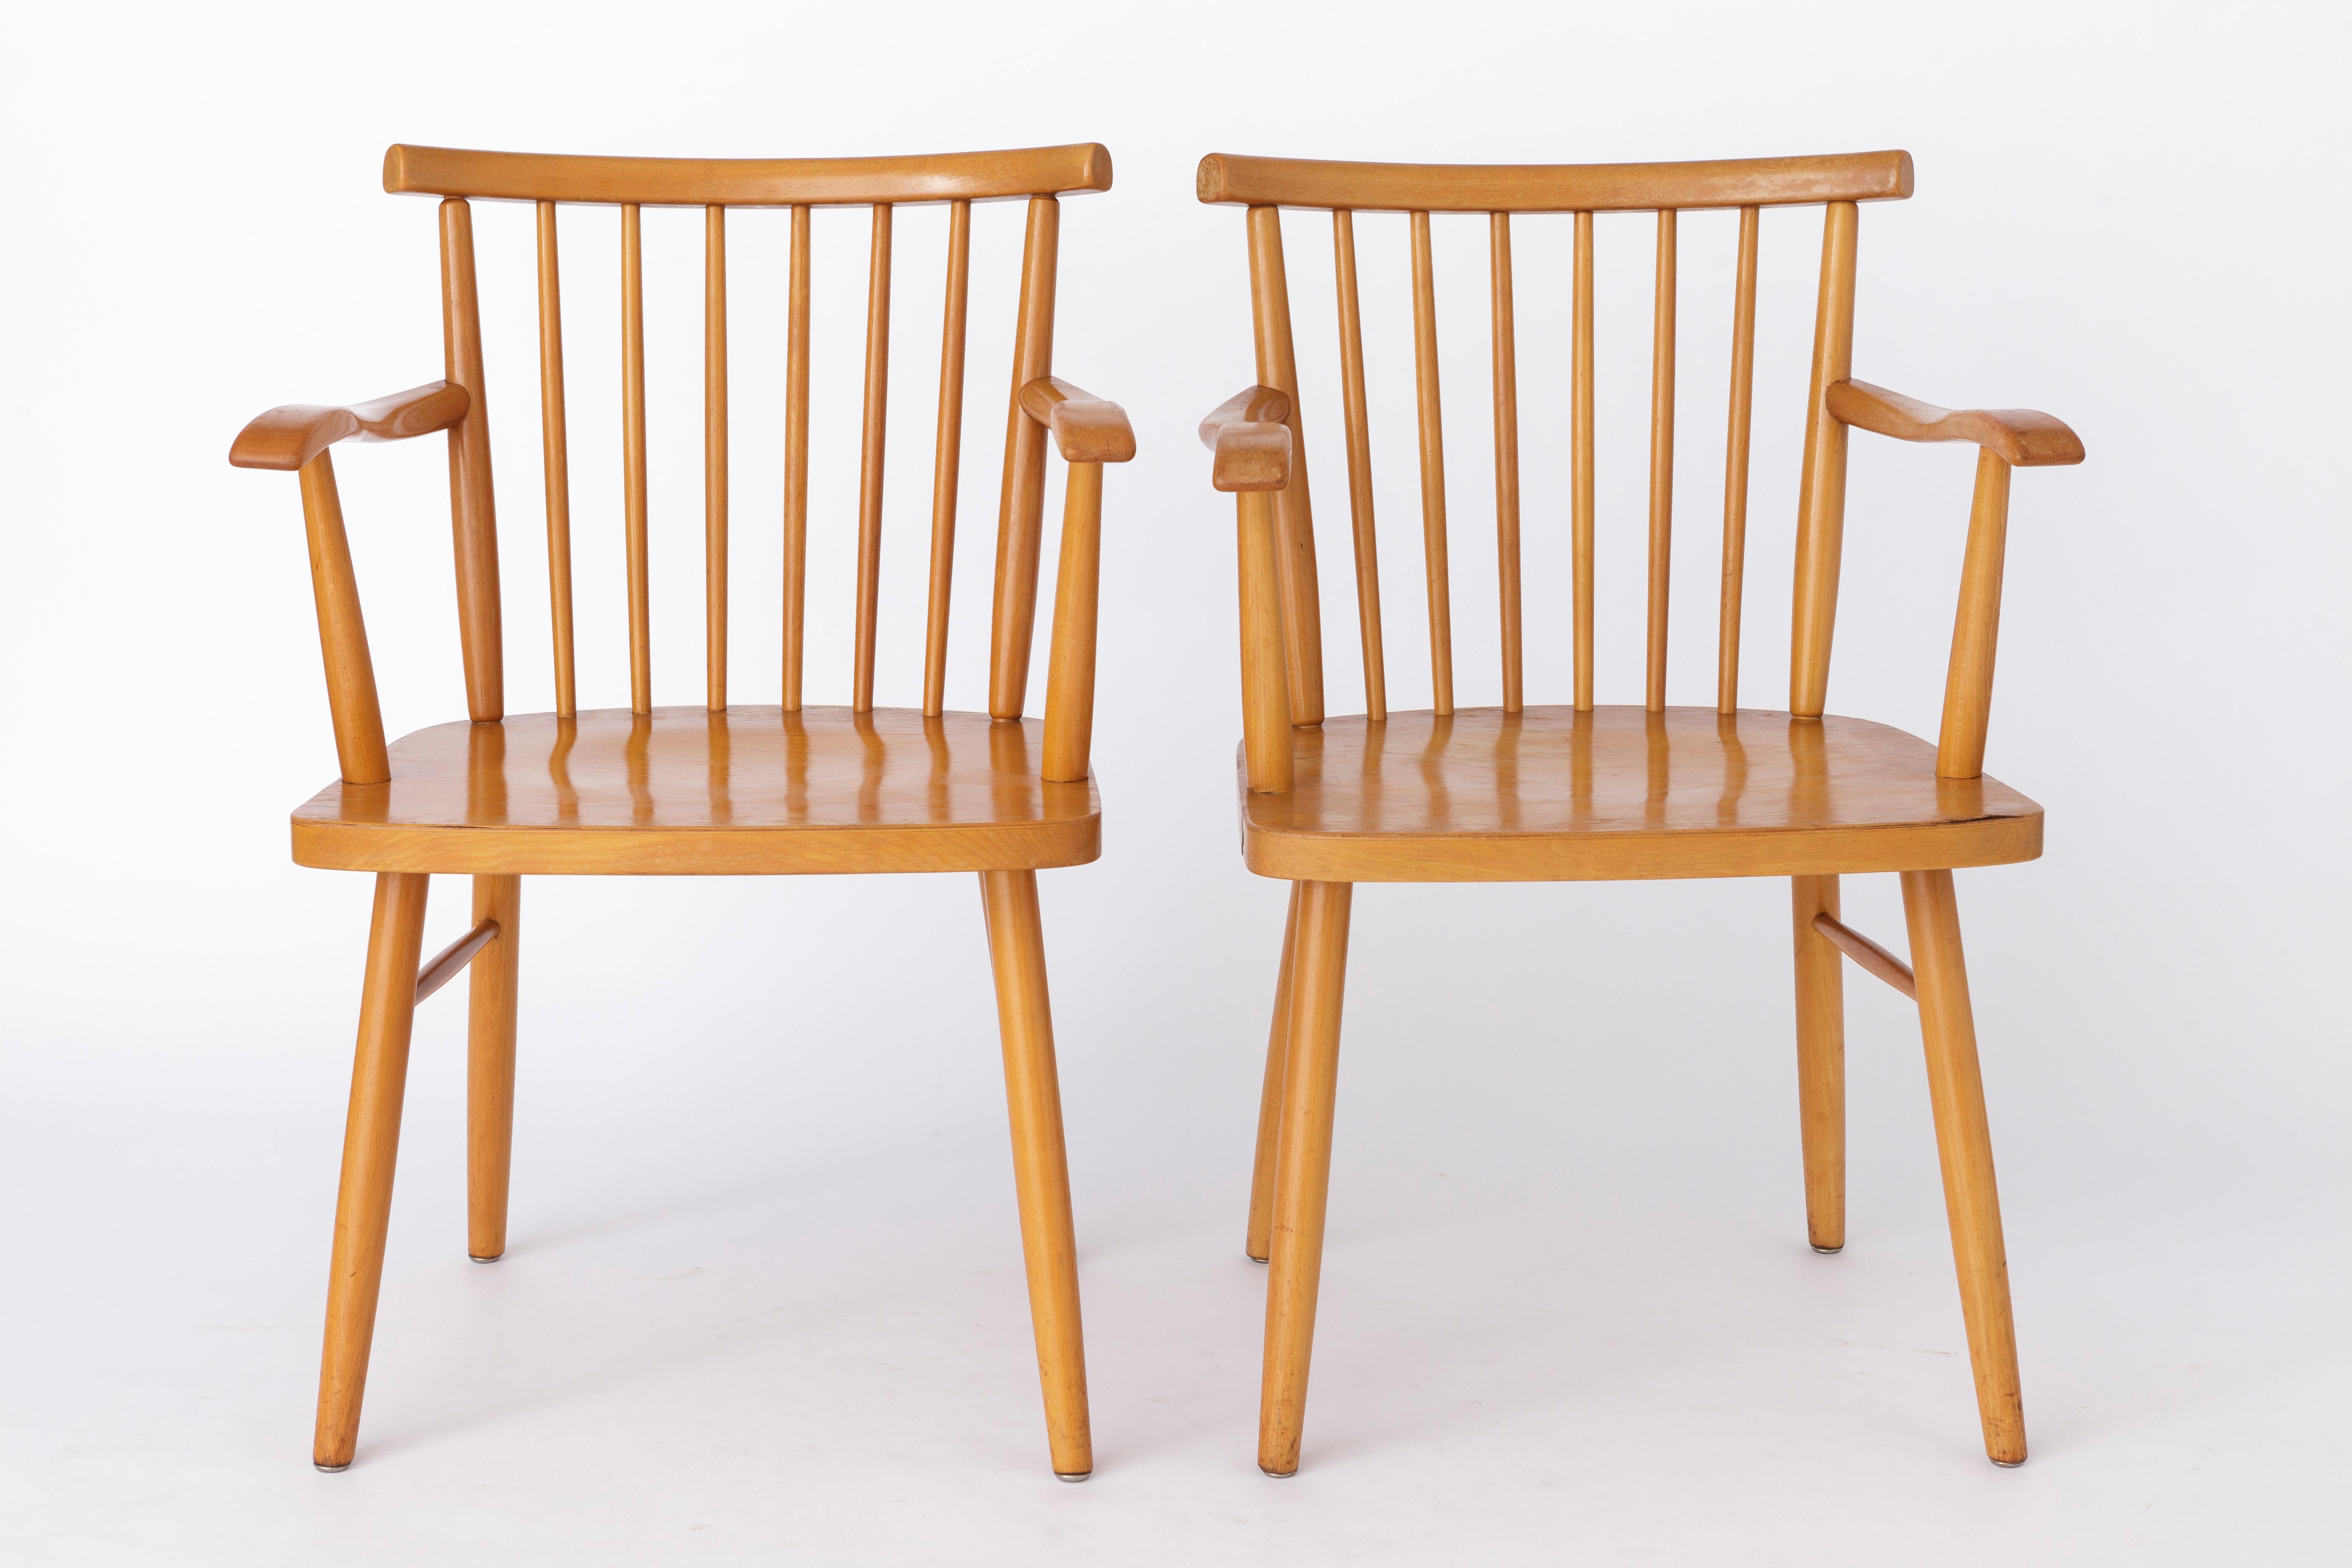 2 Vintage Armchairs from German manufacturer Lübke. 
Production period: 1950s. 
Displayed price is for 2 chairs. Totally up to 3 chairs + Bench available. 

Sturdy Beech wood frame. Refurbished and oiled. 
Manufacturer stamp under the seat. 